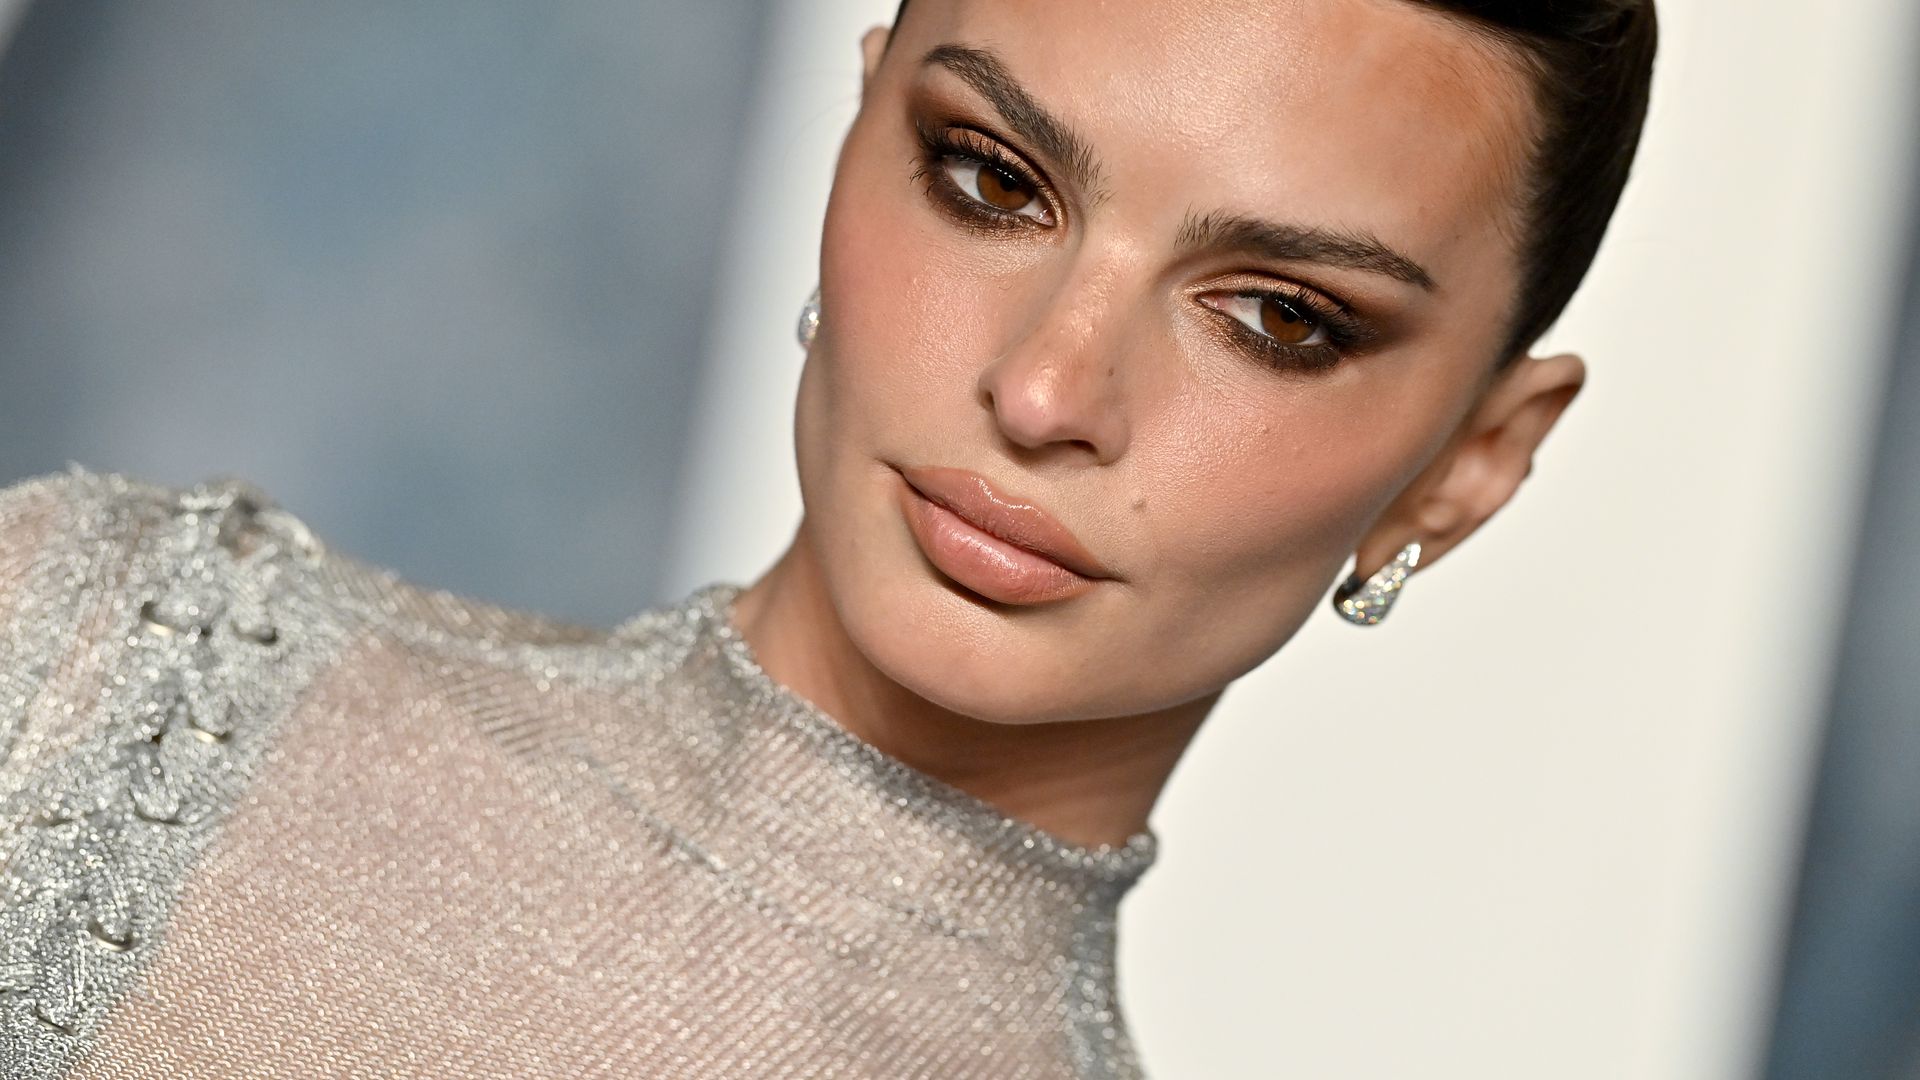 BEVERLY HILLS, CALIFORNIA - MARCH 12: Emily Ratajkowski attends the 2023 Vanity Fair Oscar Party hosted by Radhika Jones at Wallis Annenberg Center for the Performing Arts on March 12, 2023 in Beverly Hills, California. (Photo by Axelle/Bauer-Griffin/Film